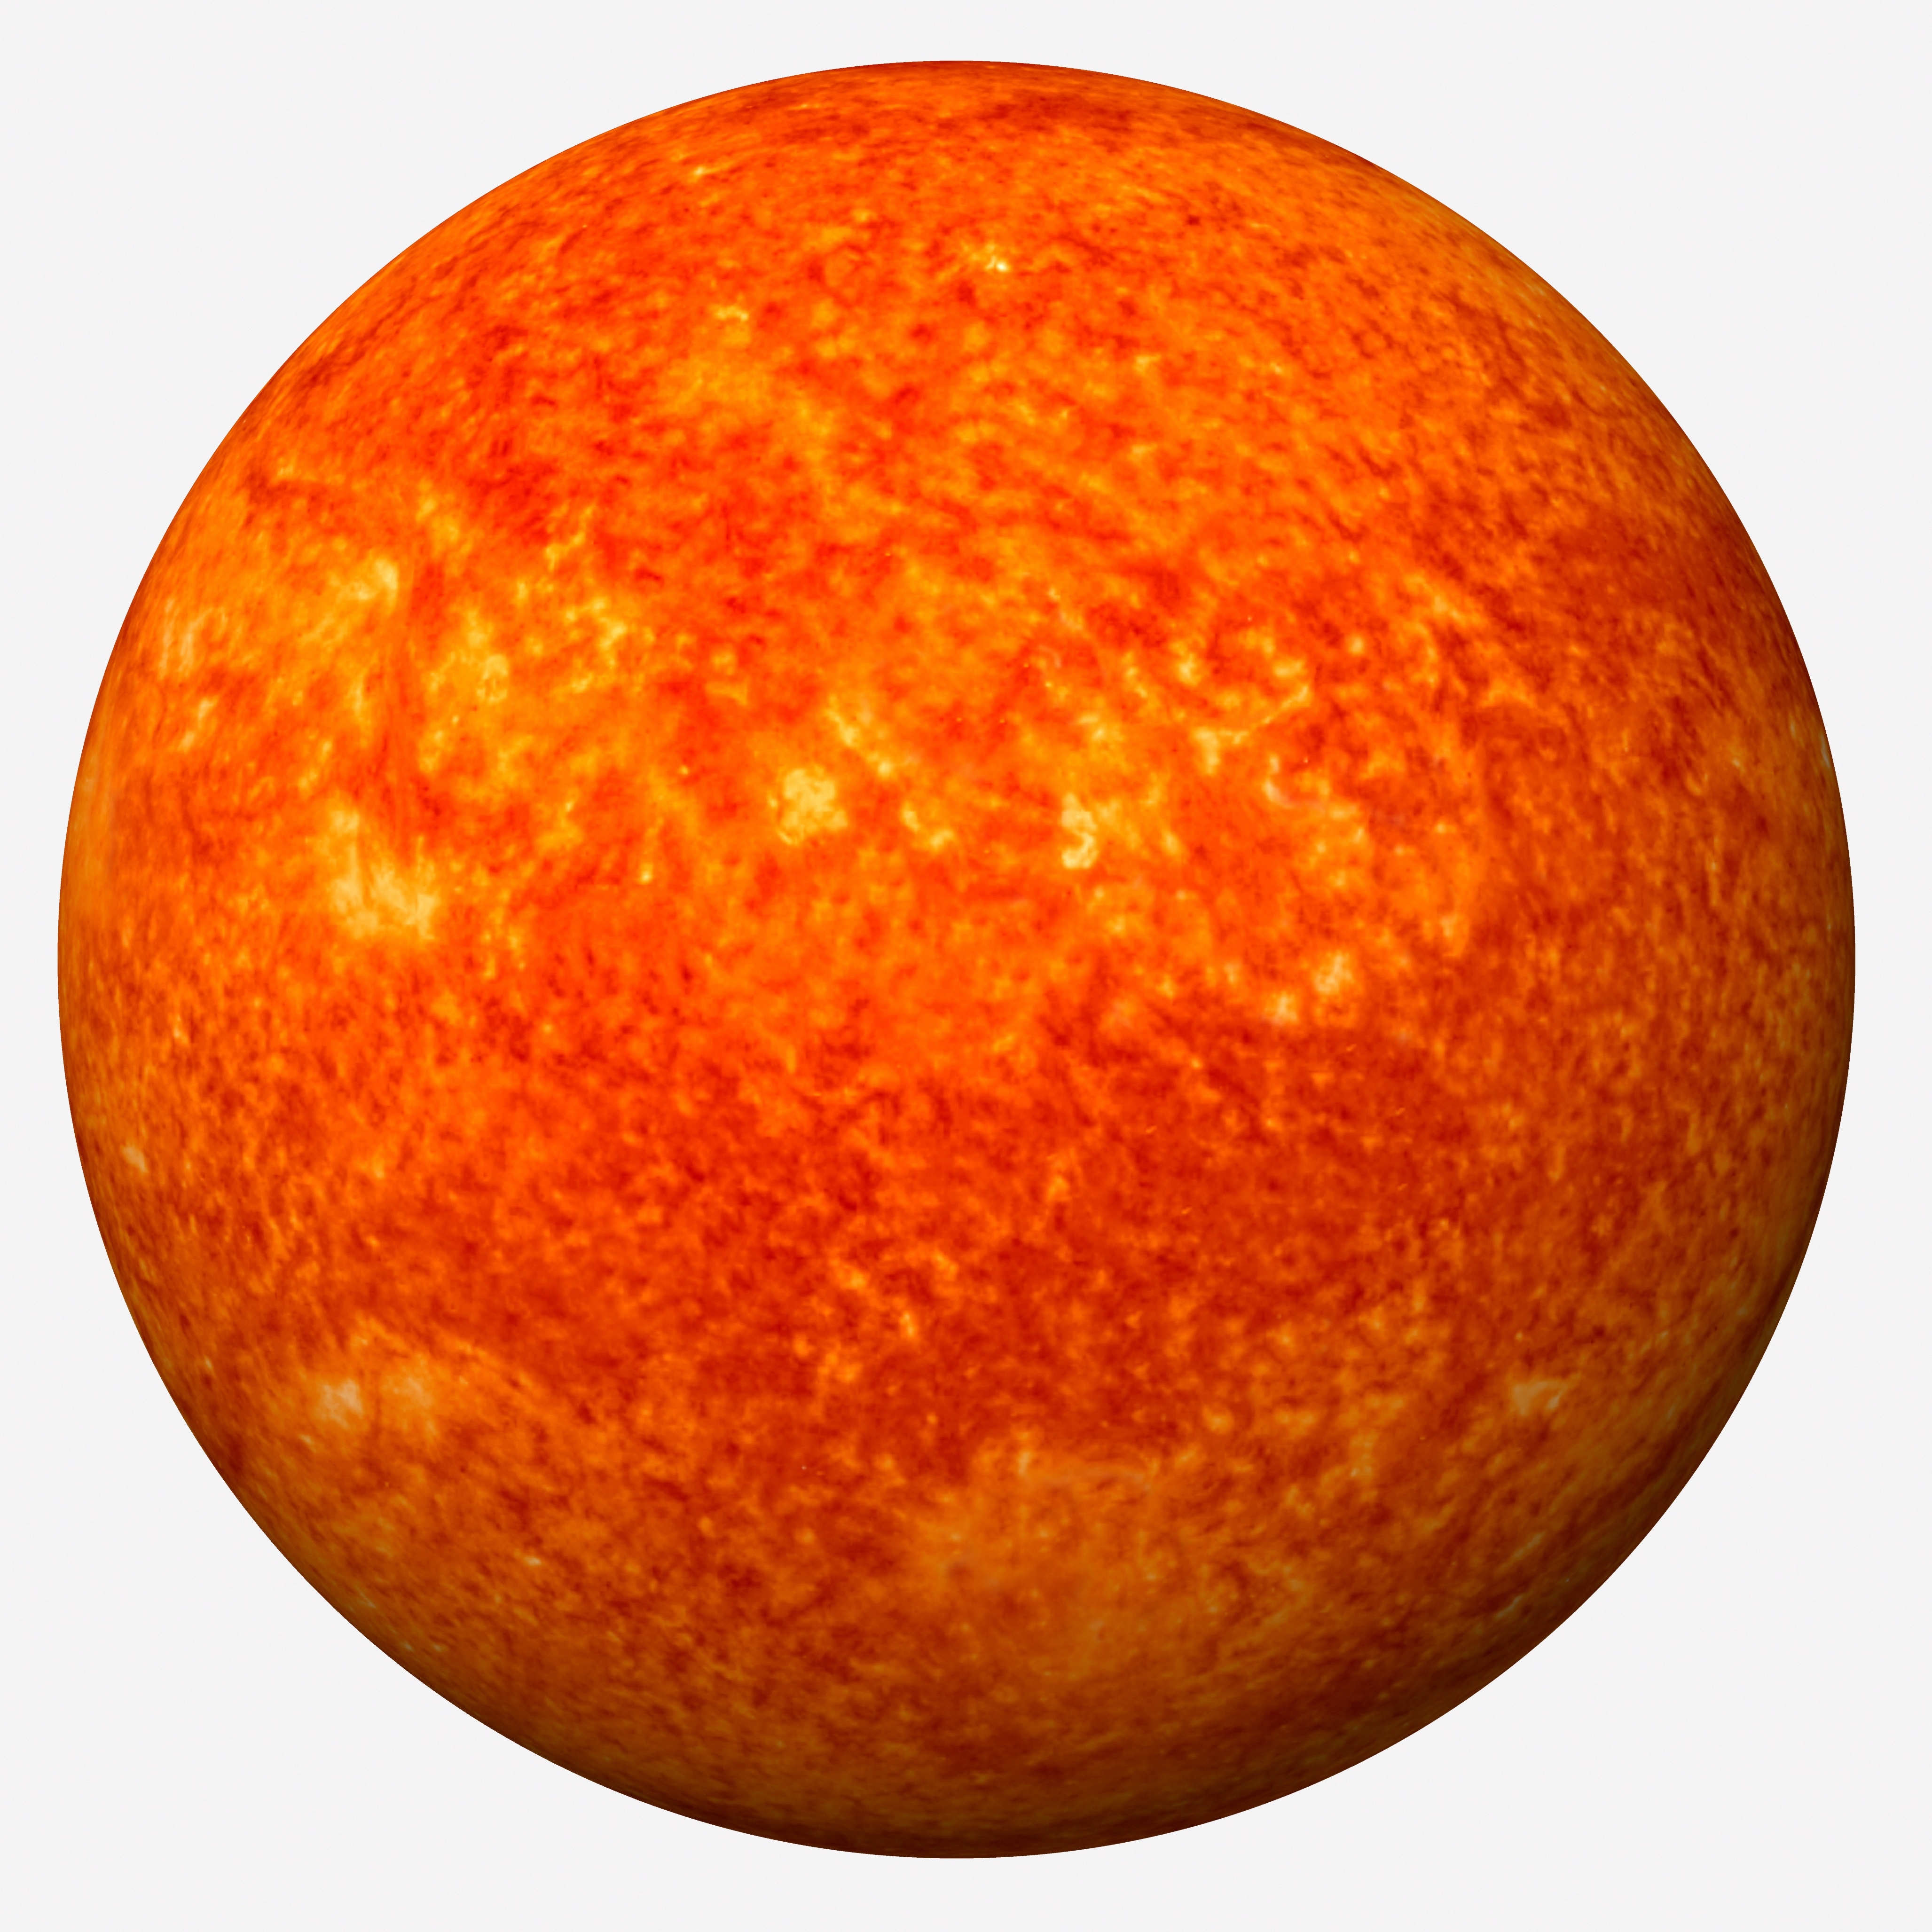 There's a prize hidden inside this red giant